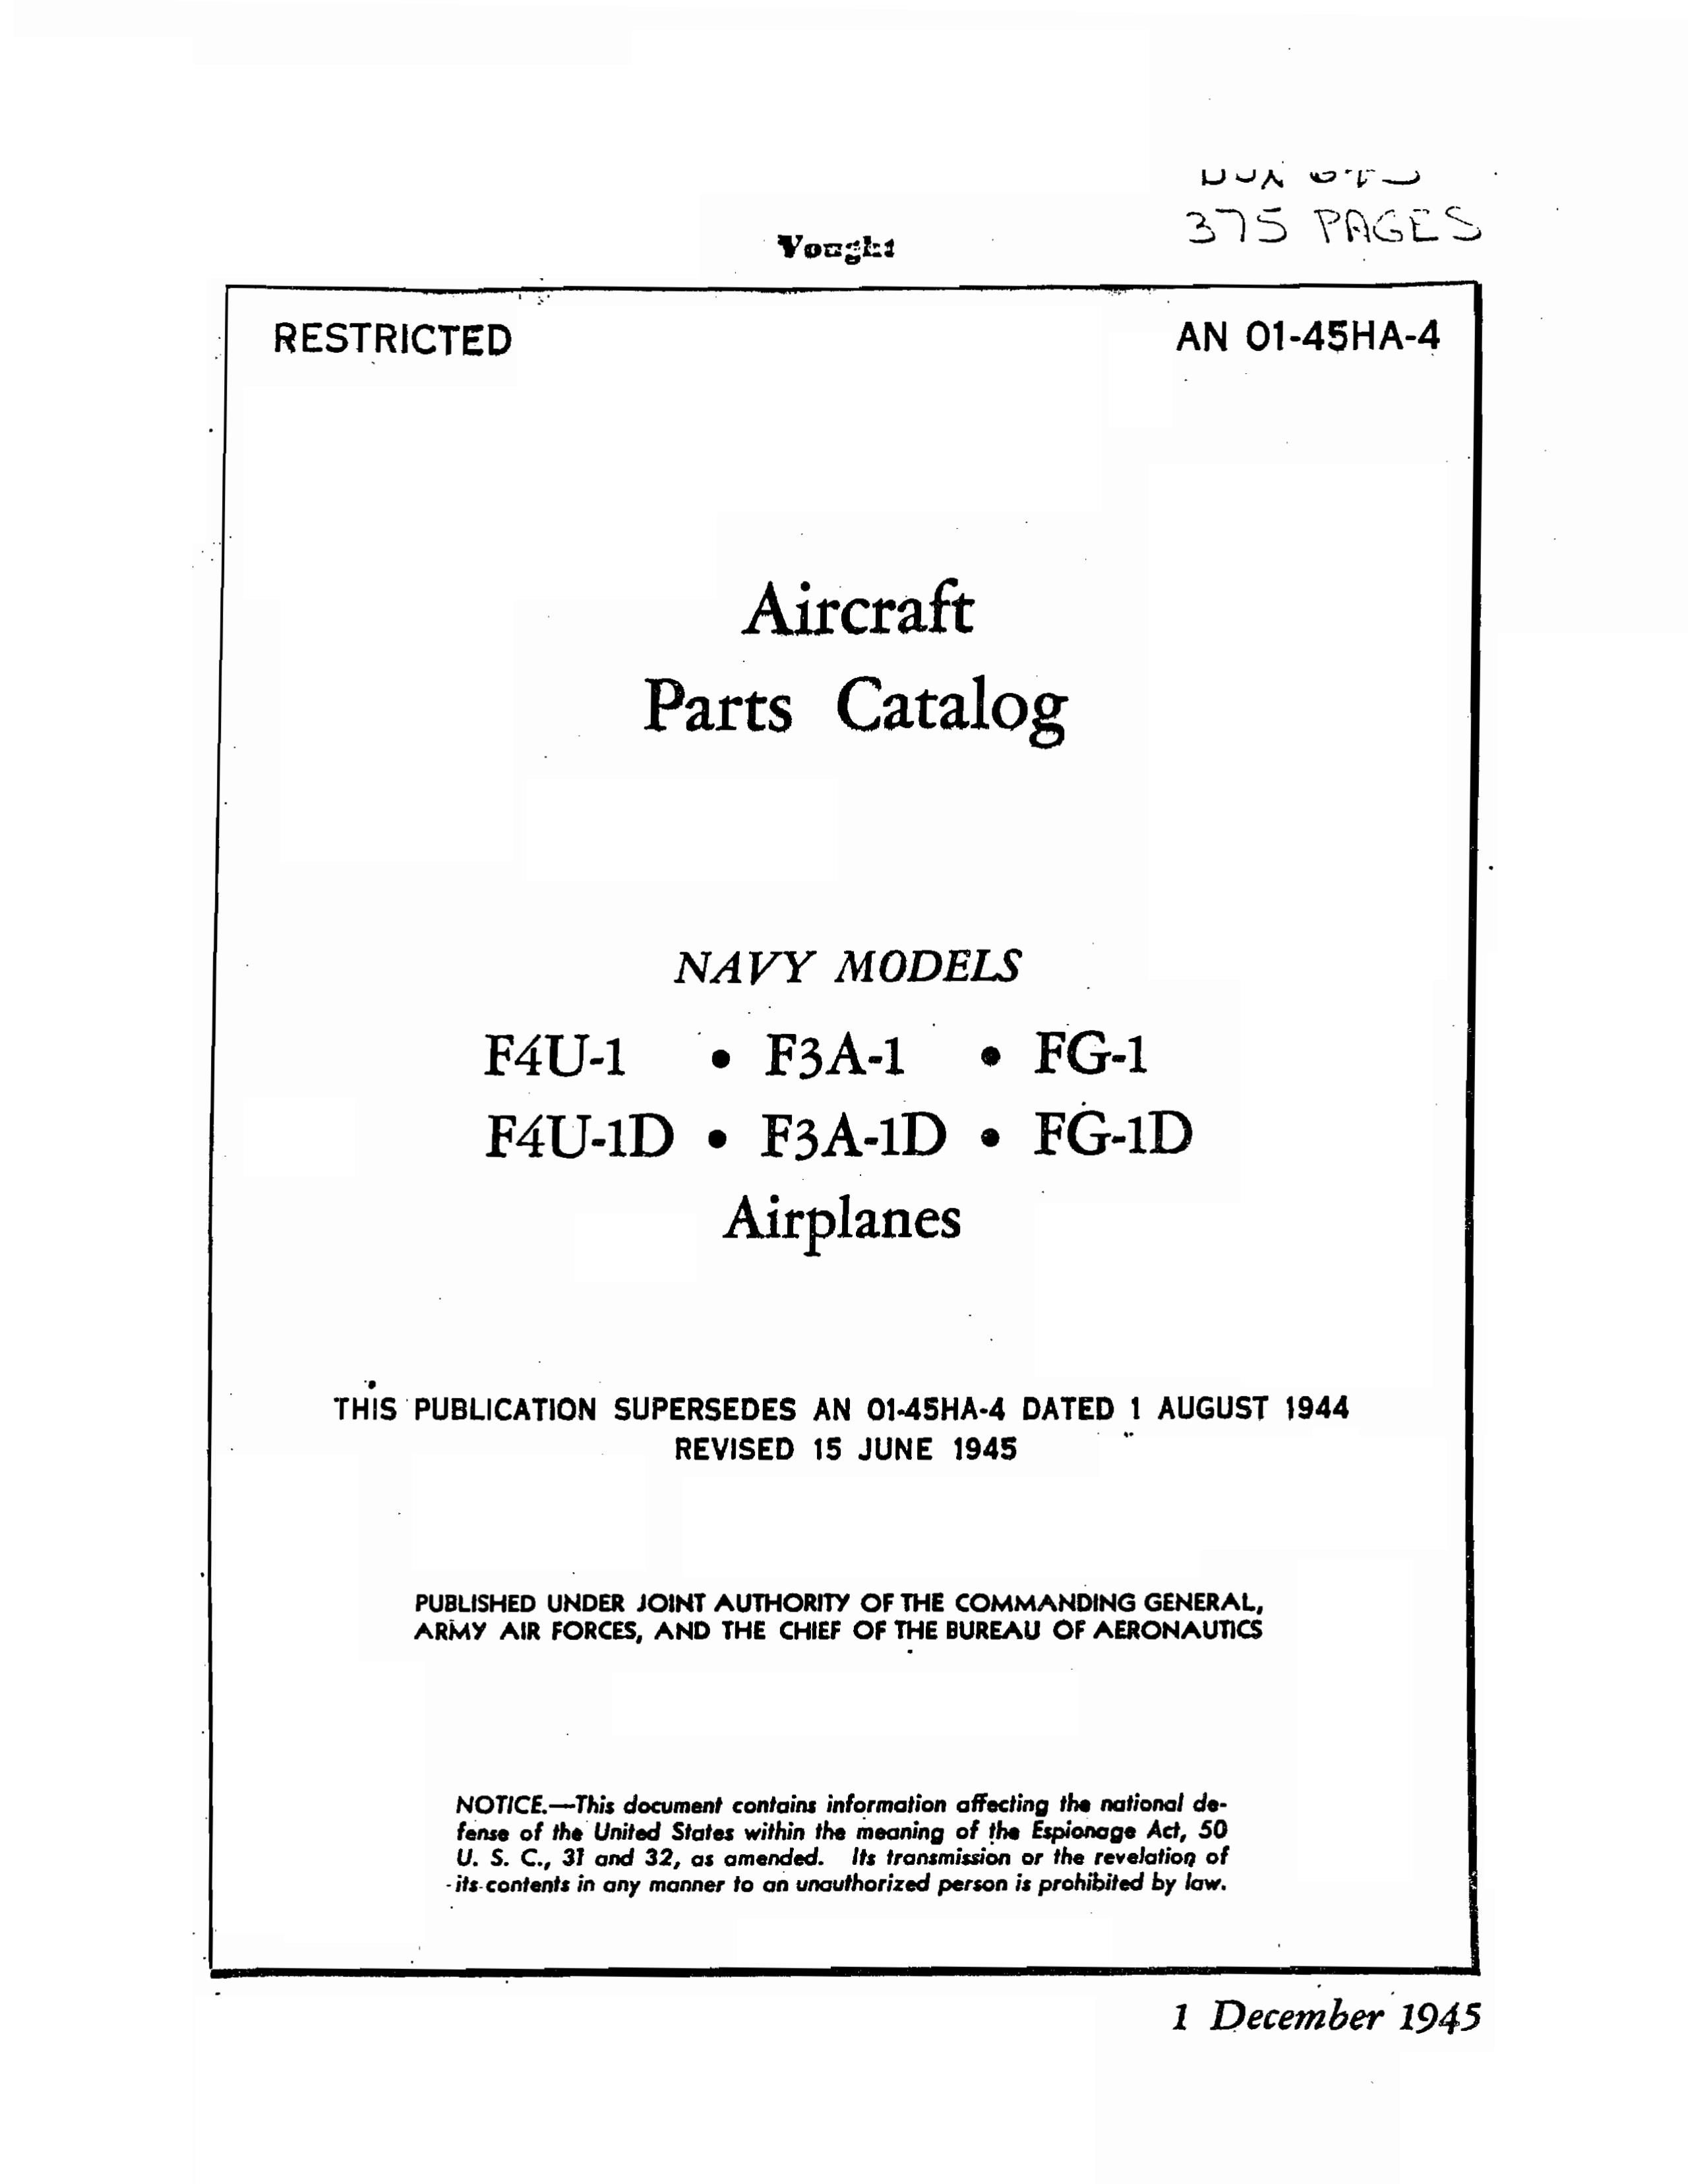 Sample page 1 from AirCorps Library document: Parts Catalog - Corsair